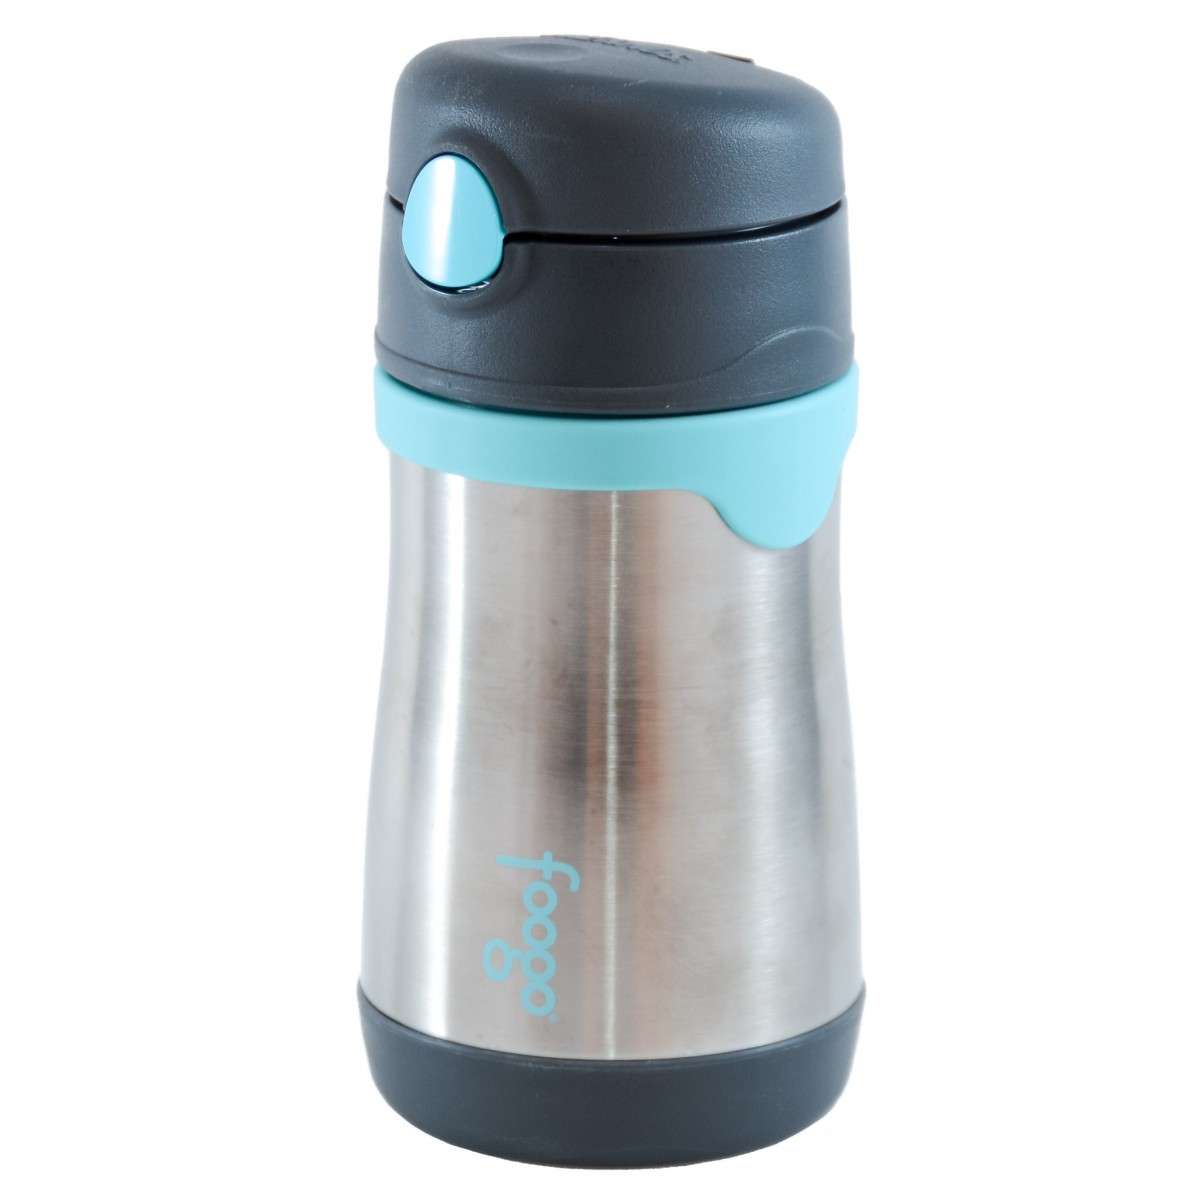 Thermos Foogo Stainless Steel Straw Bottle, 10 oz, Charcoal/Teal